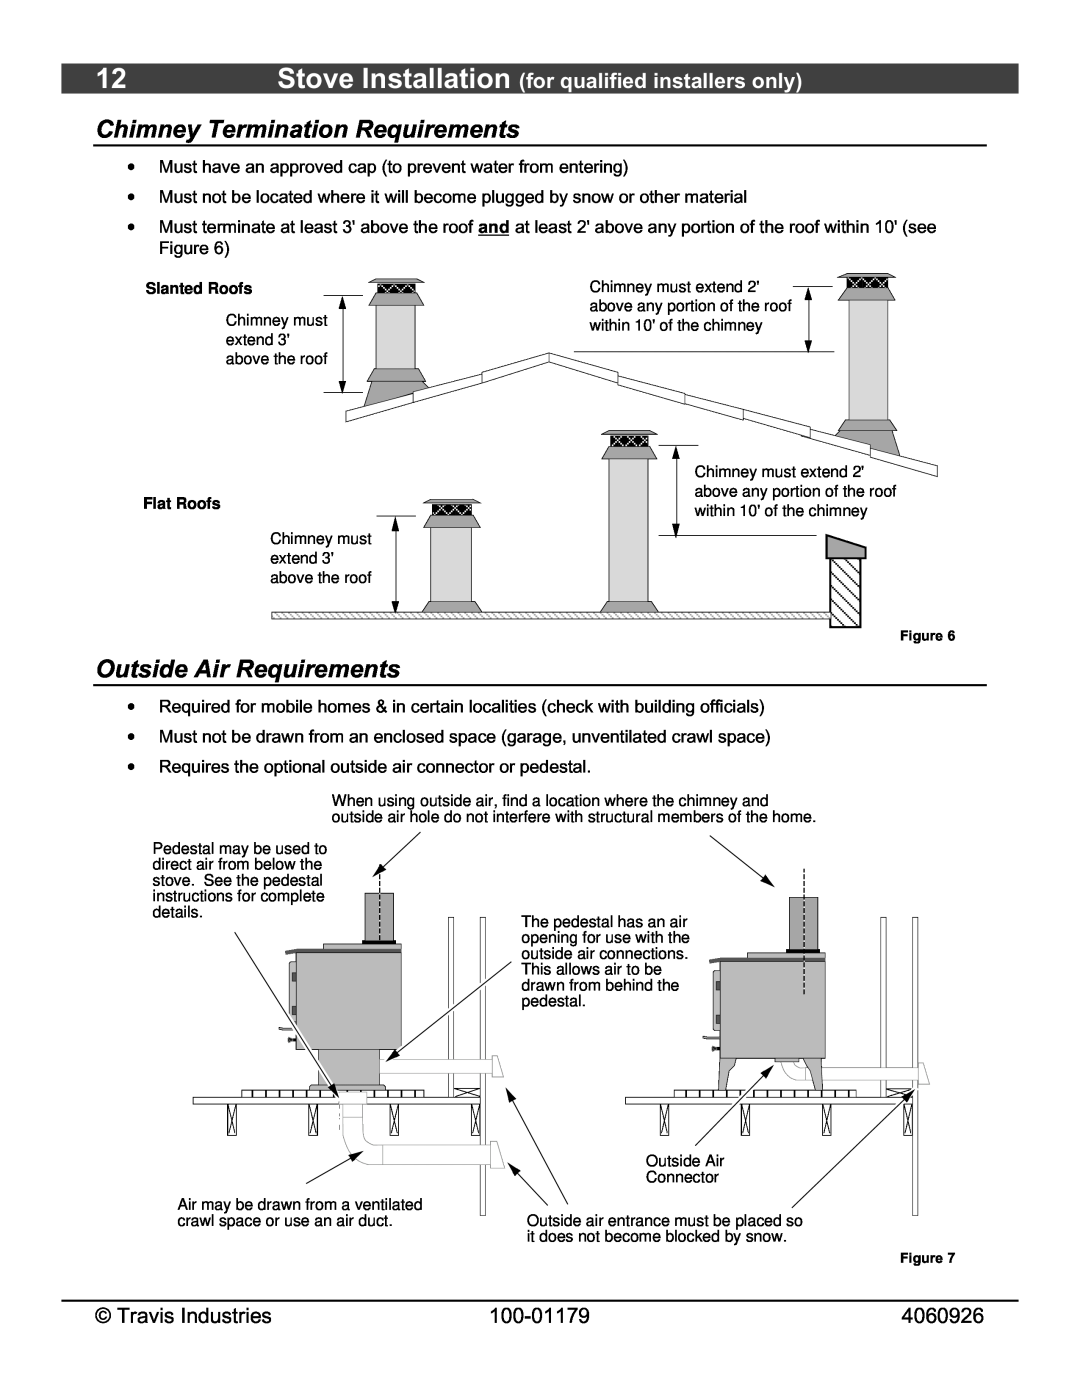 Lopi 1750 Chimney Termination Requirements, Outside Air Requirements, Stove Installation for qualified installers only 